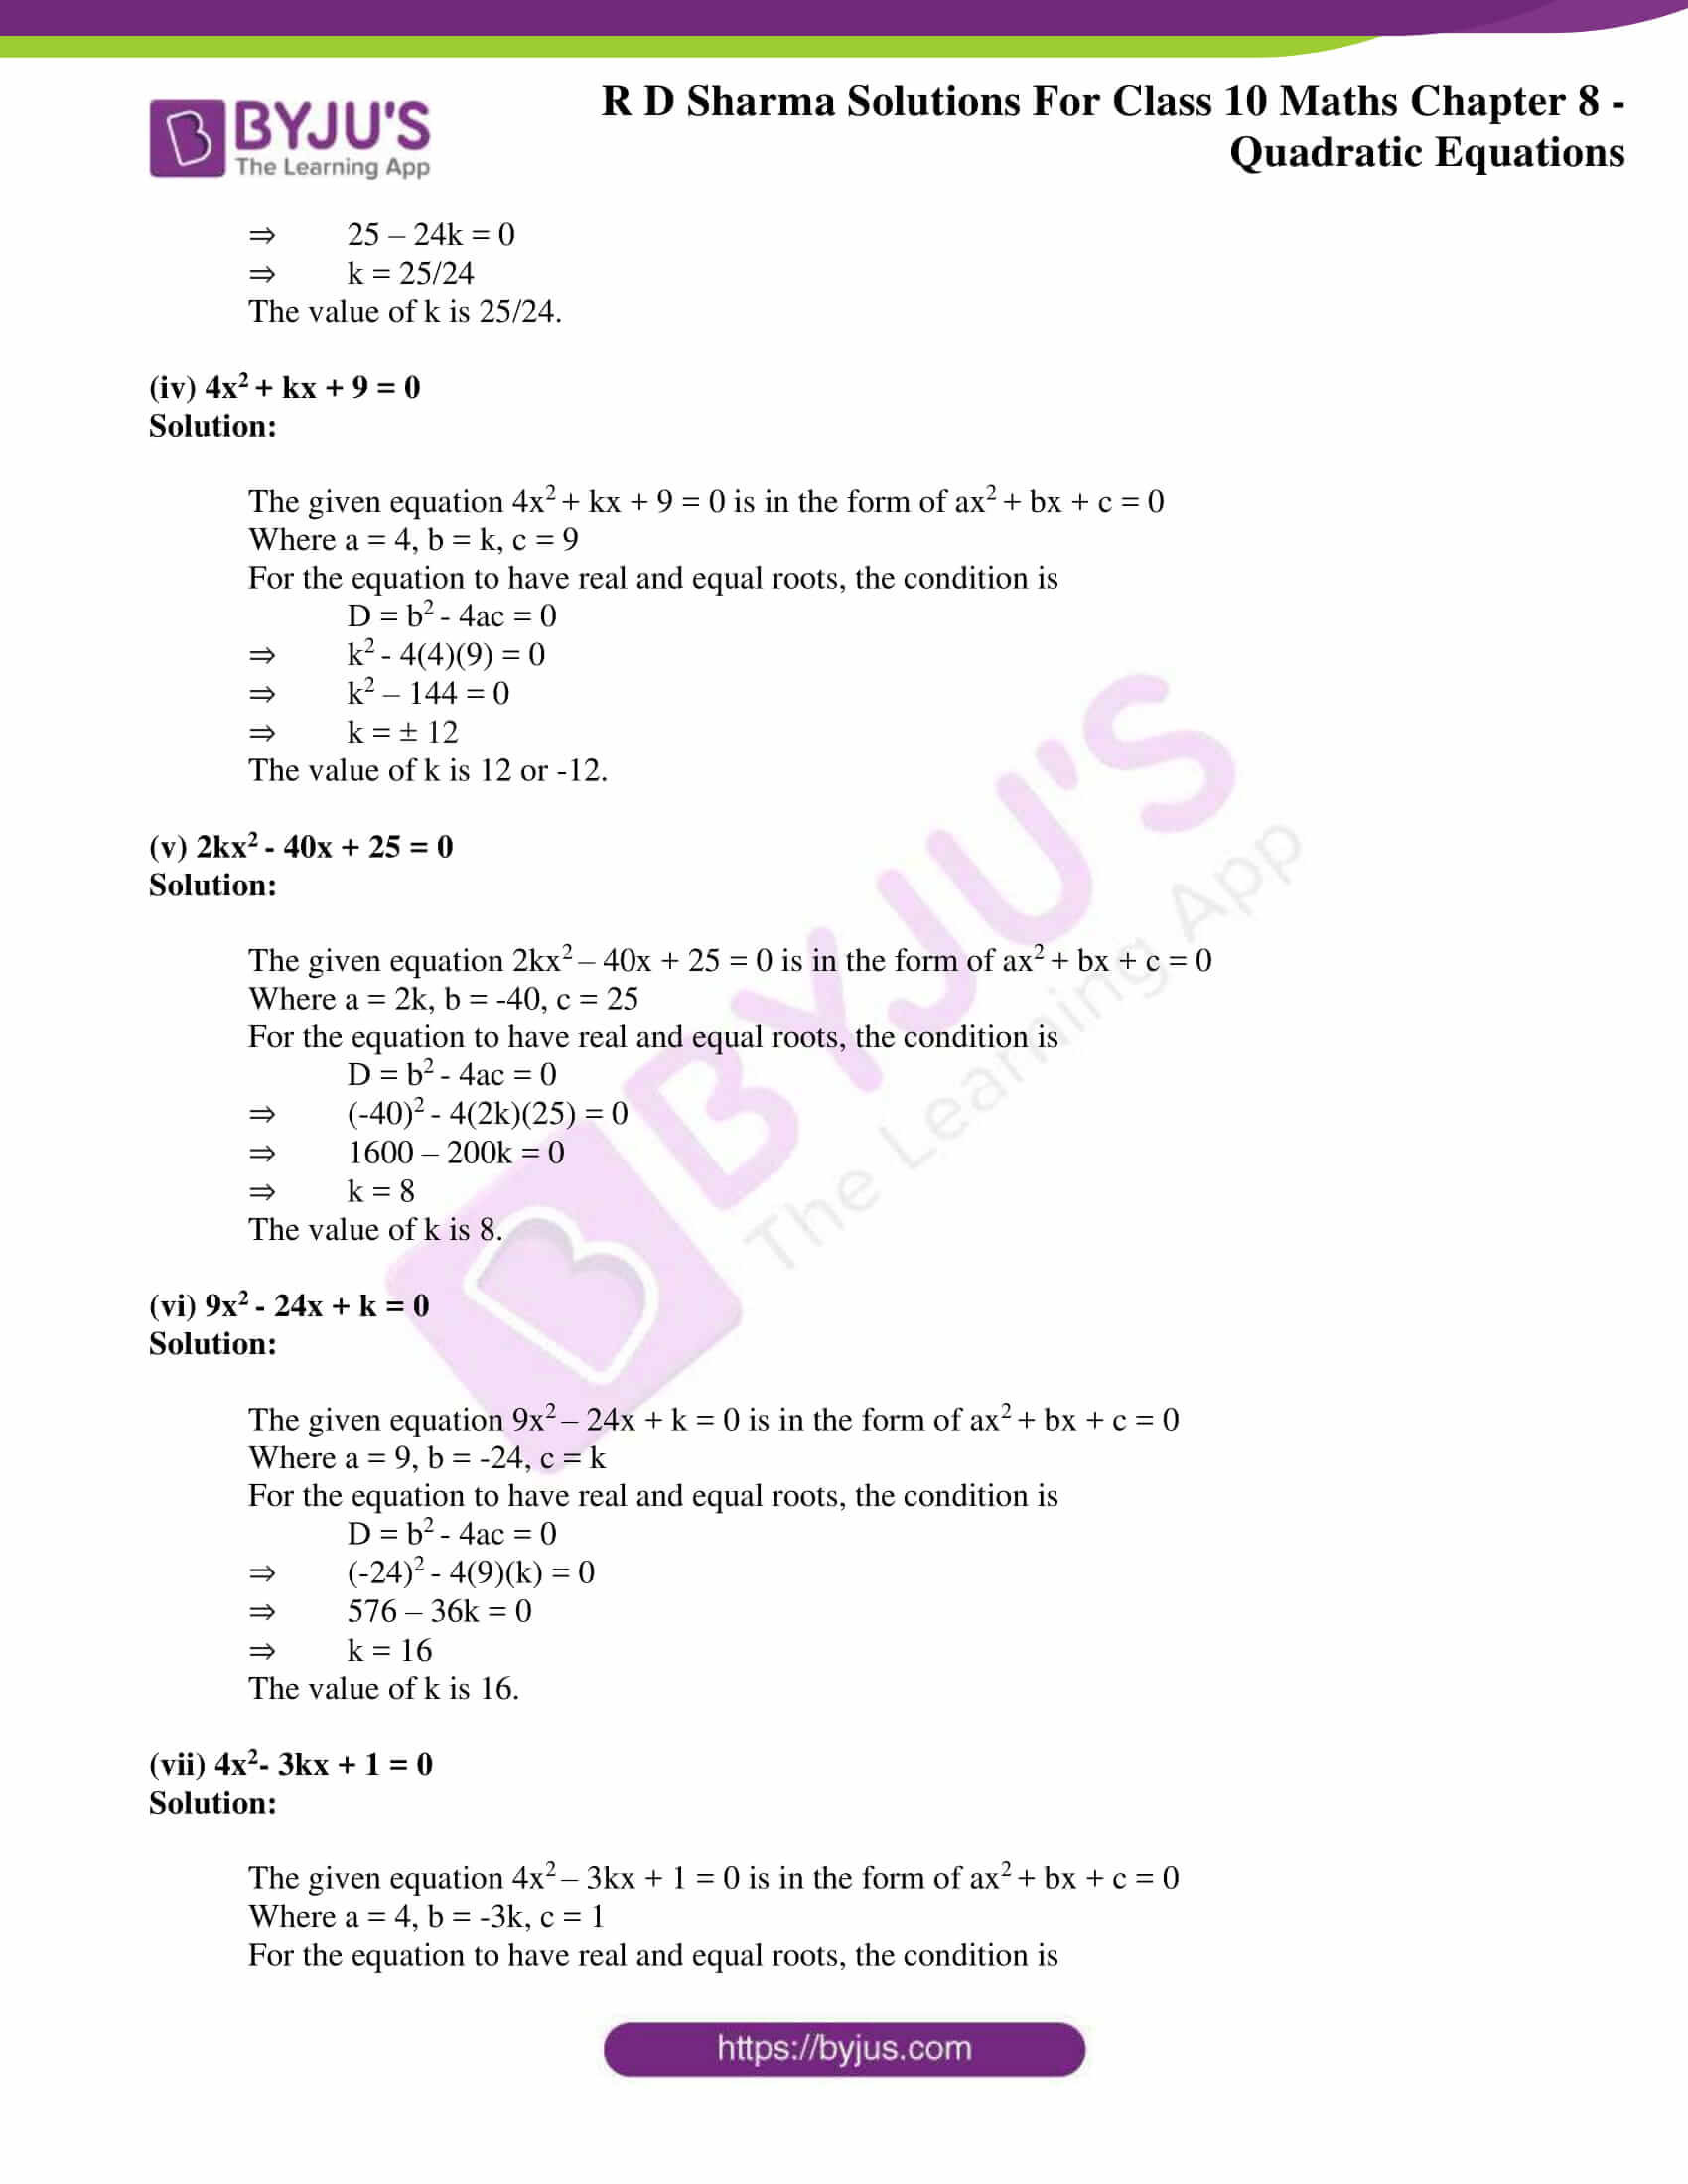 Completing the Square Practice Worksheet Rd Sharma solutions for Class 10 Chapter 8 Quadratic